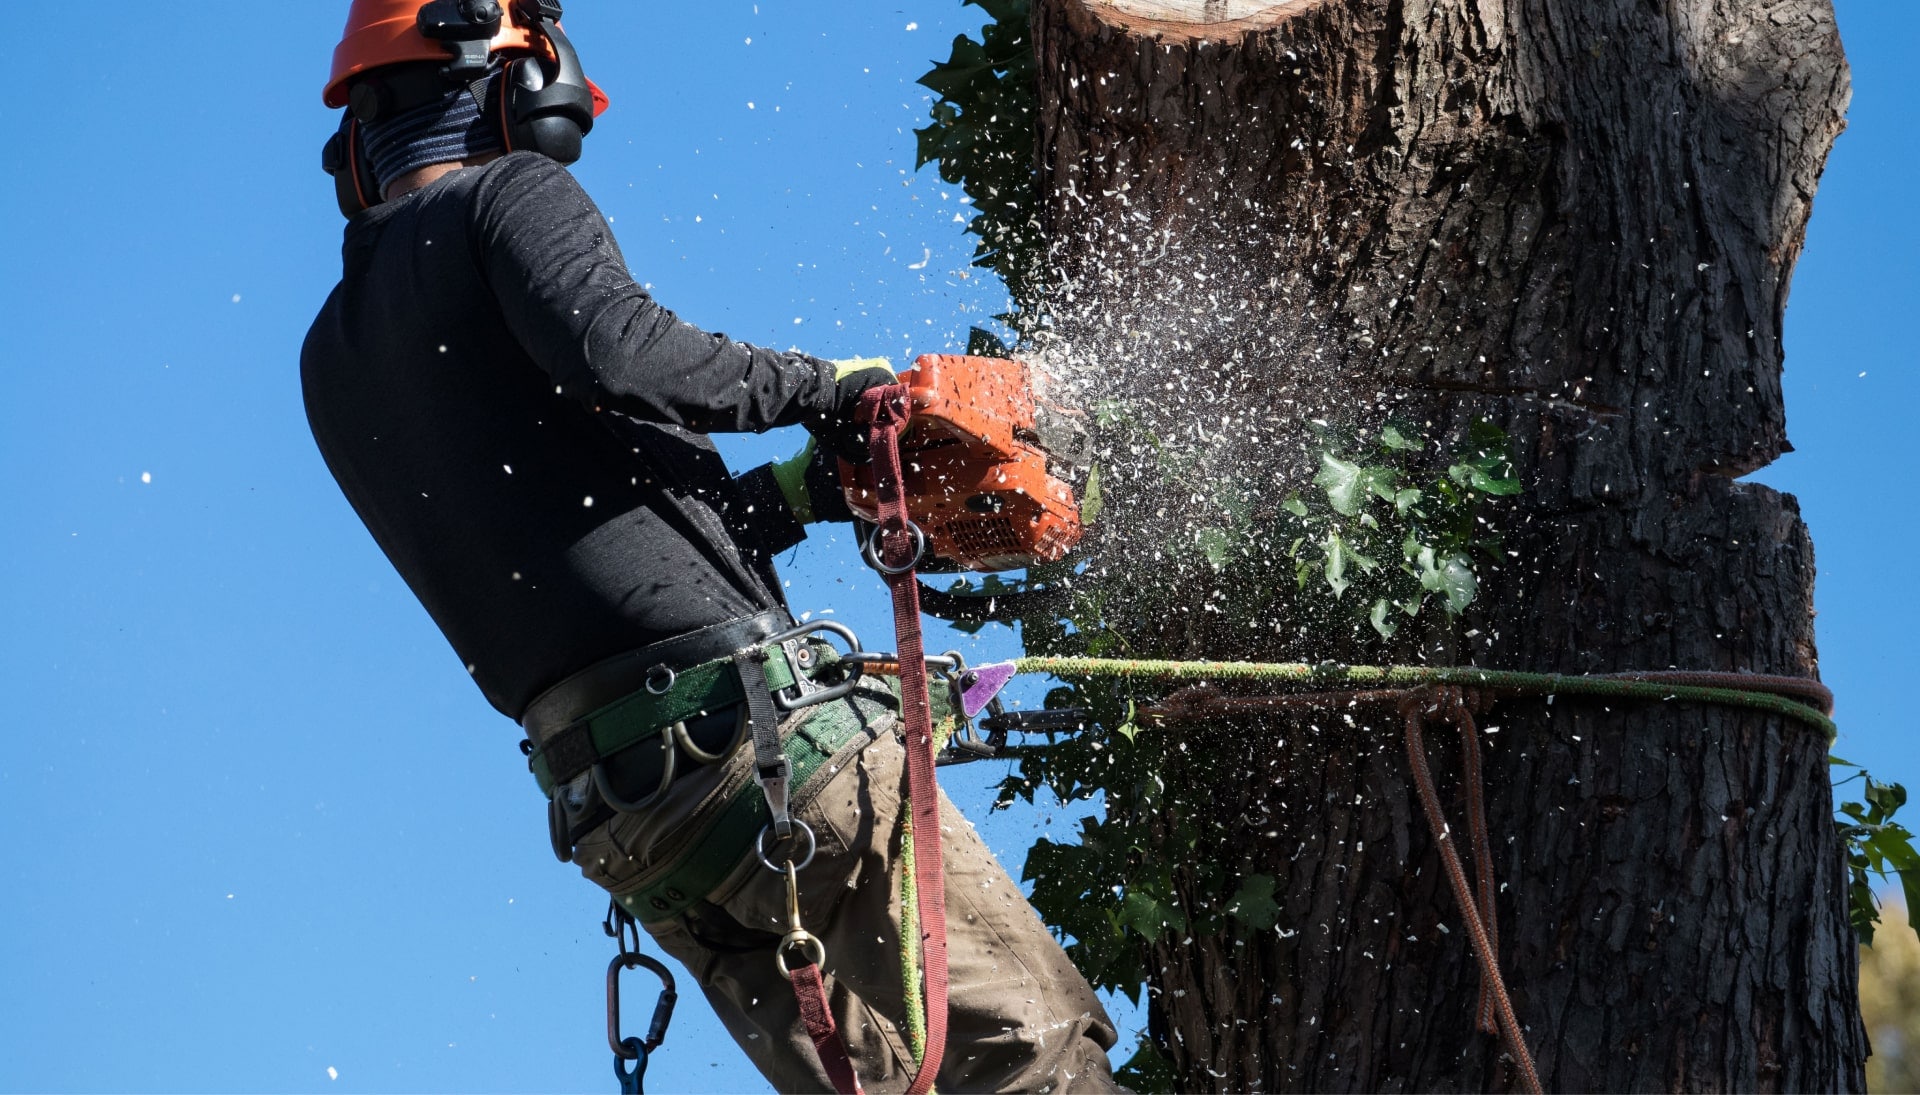 A tree removal expert is high in tree to cut down stump in Austin, TX.